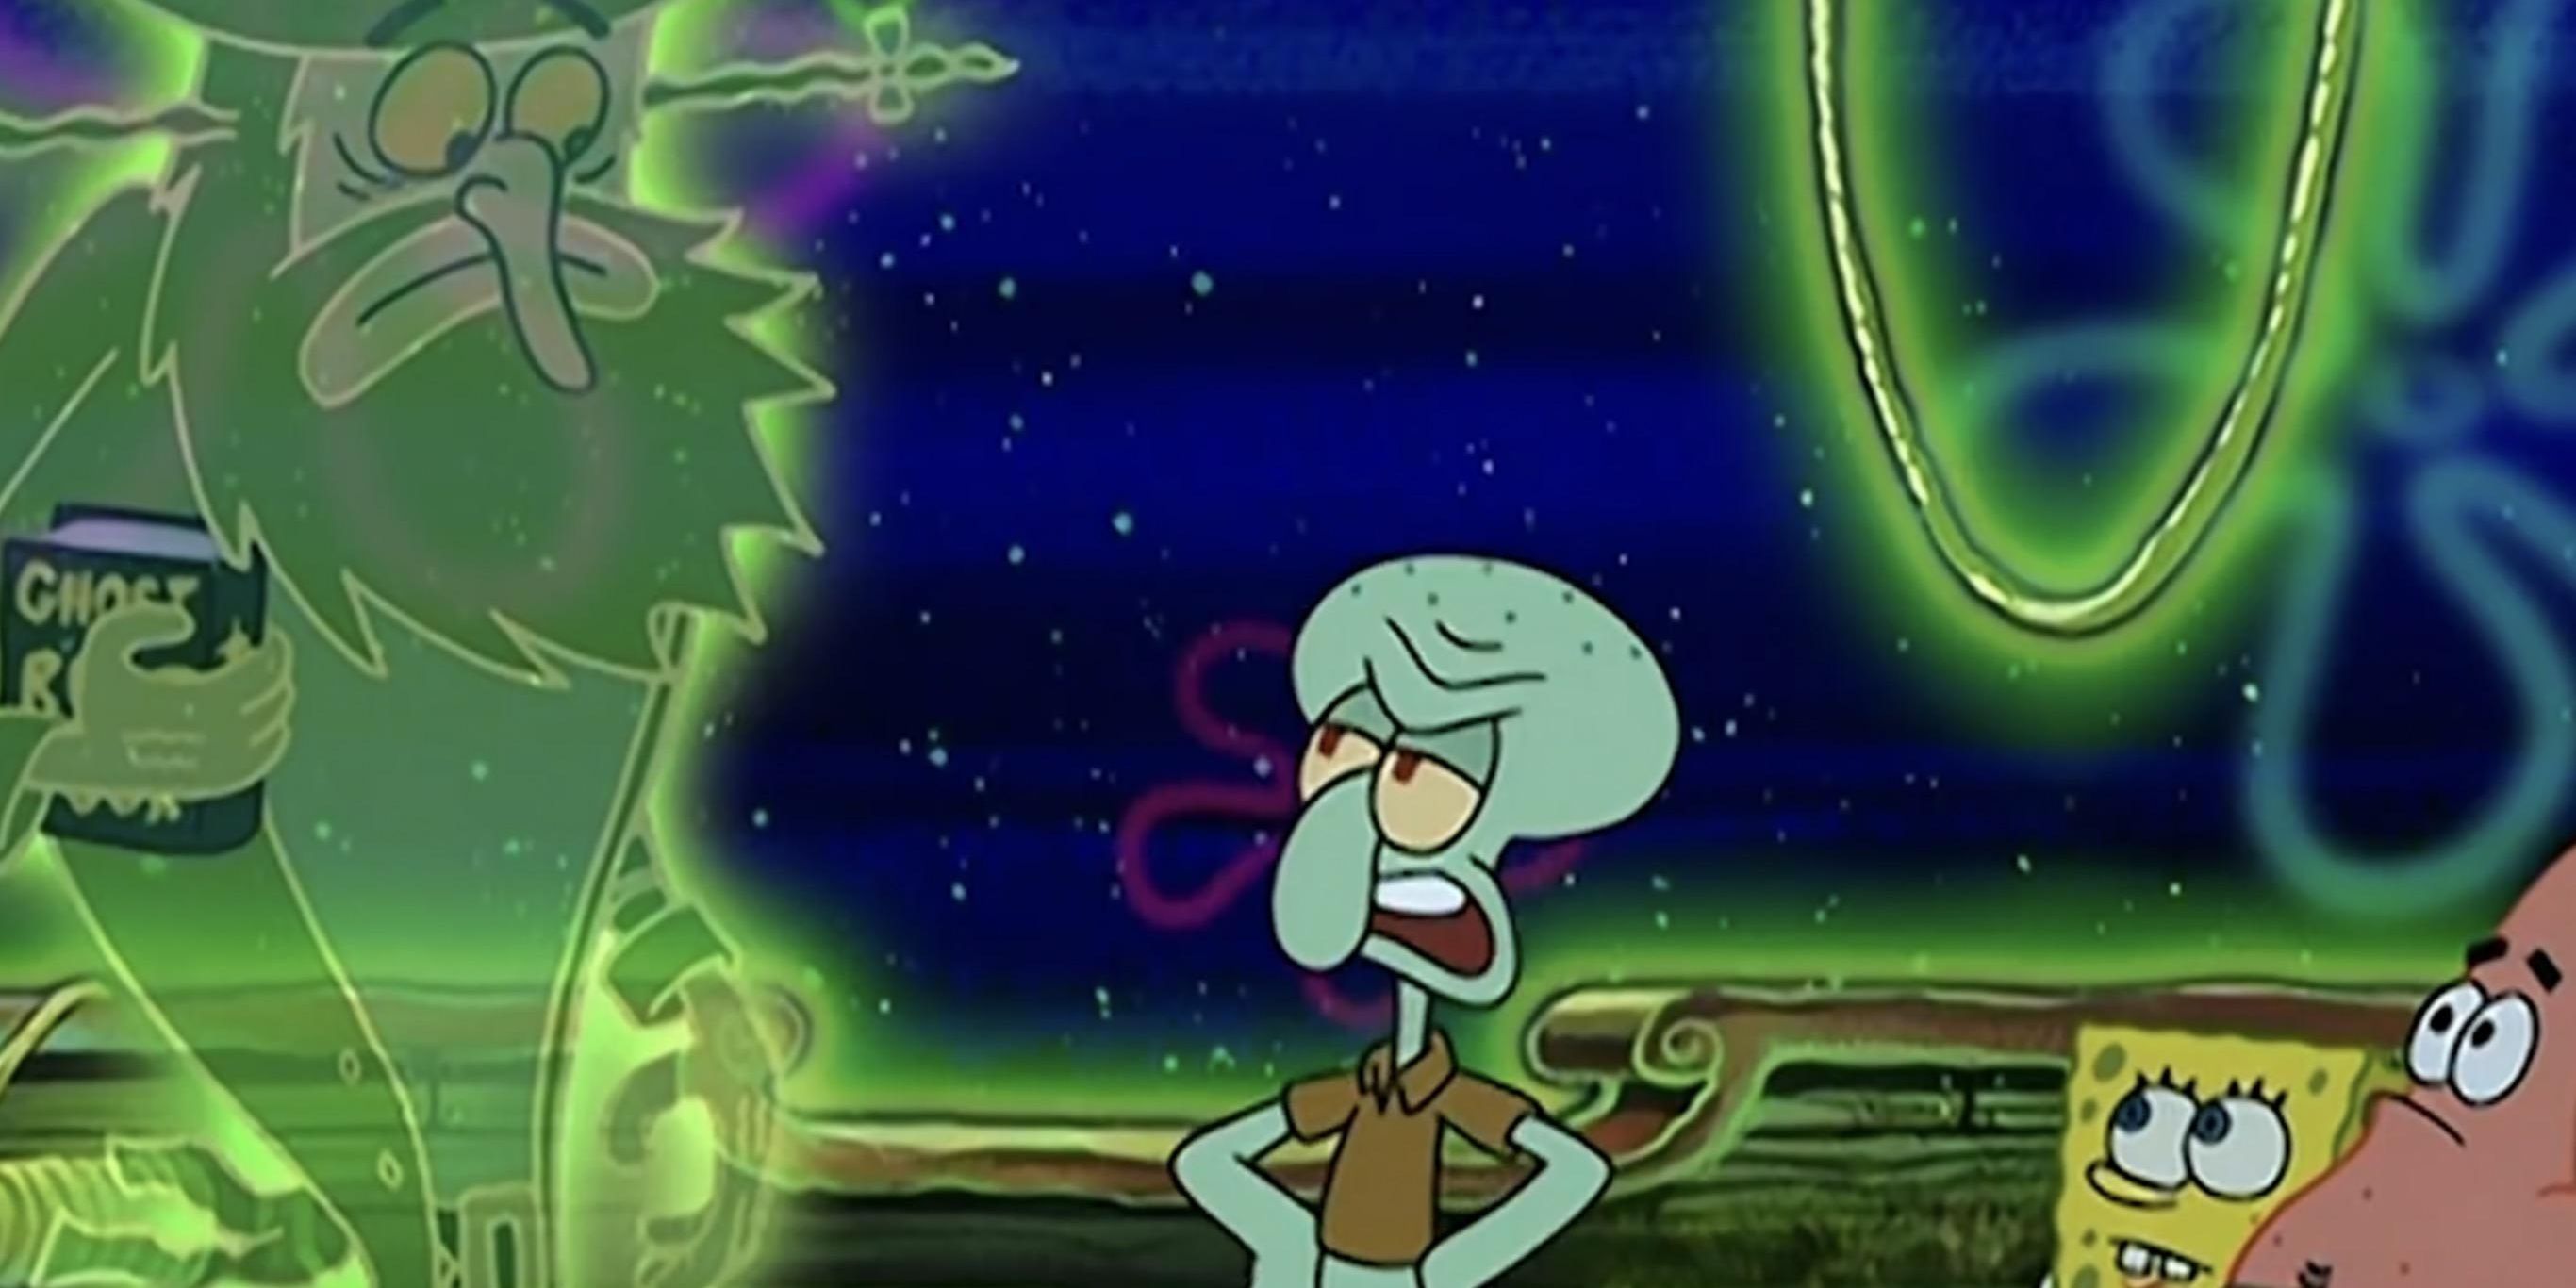 Squidward (center) glares disapprovingly at the Flying Dutchman (left) as SpongeBob and Patrick (right) watch on. Image source: reddit.com